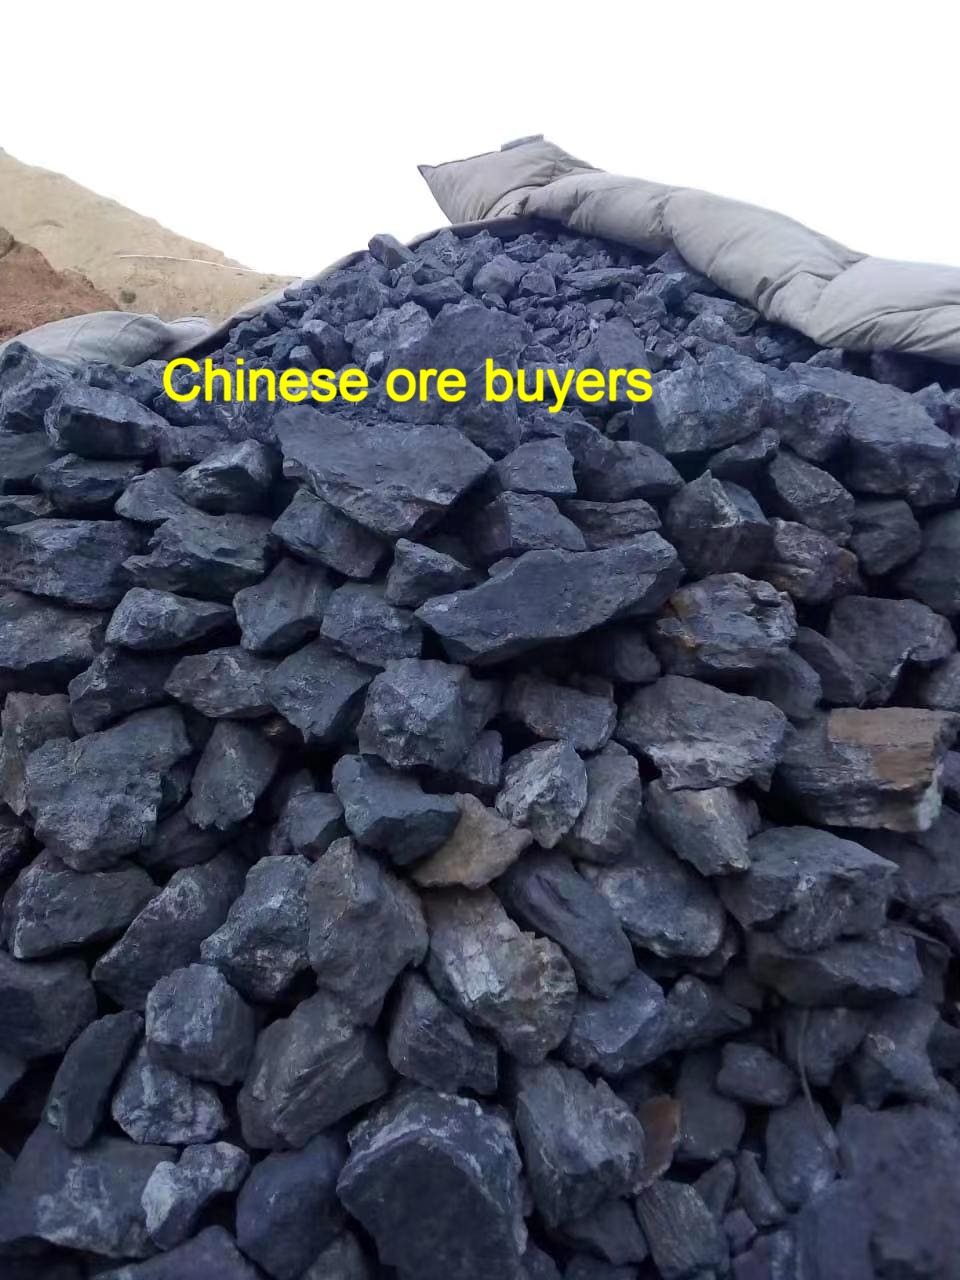 Chinese sellers need large quantities of antimony ore